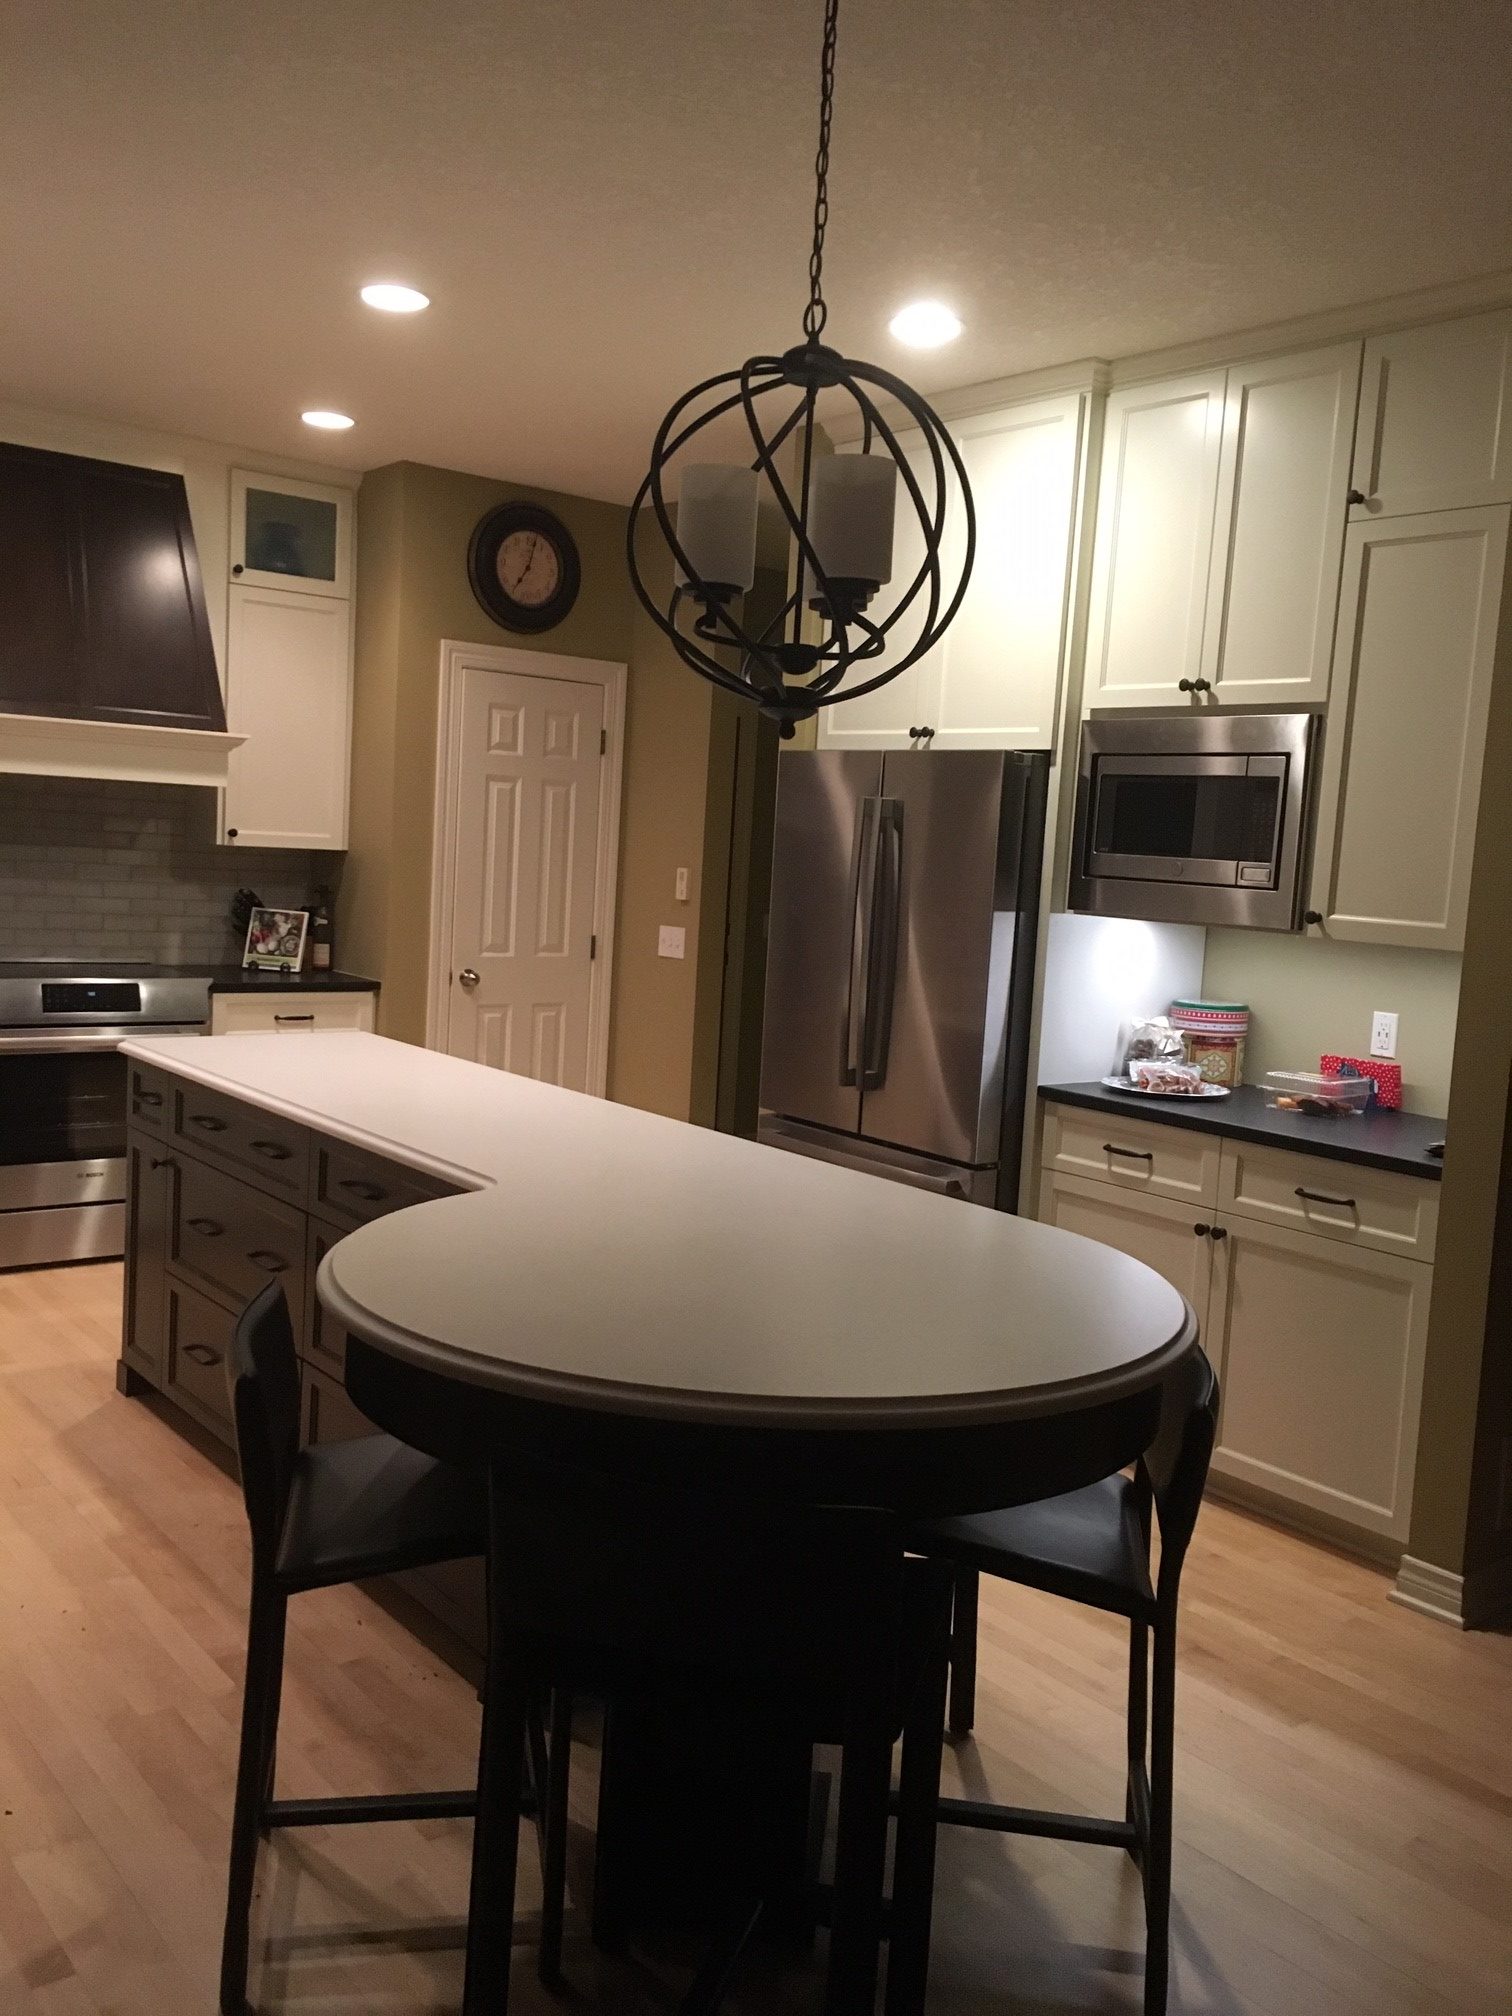 https://valleycustomcabinets.com/wp-content/uploads/2019/01/Custom-Cabinets-Kitchen-Remodel-Lake-Elmo-MN-Painted-Cabinets-Stained-Island-Table-seating-e1547850254832.jpg